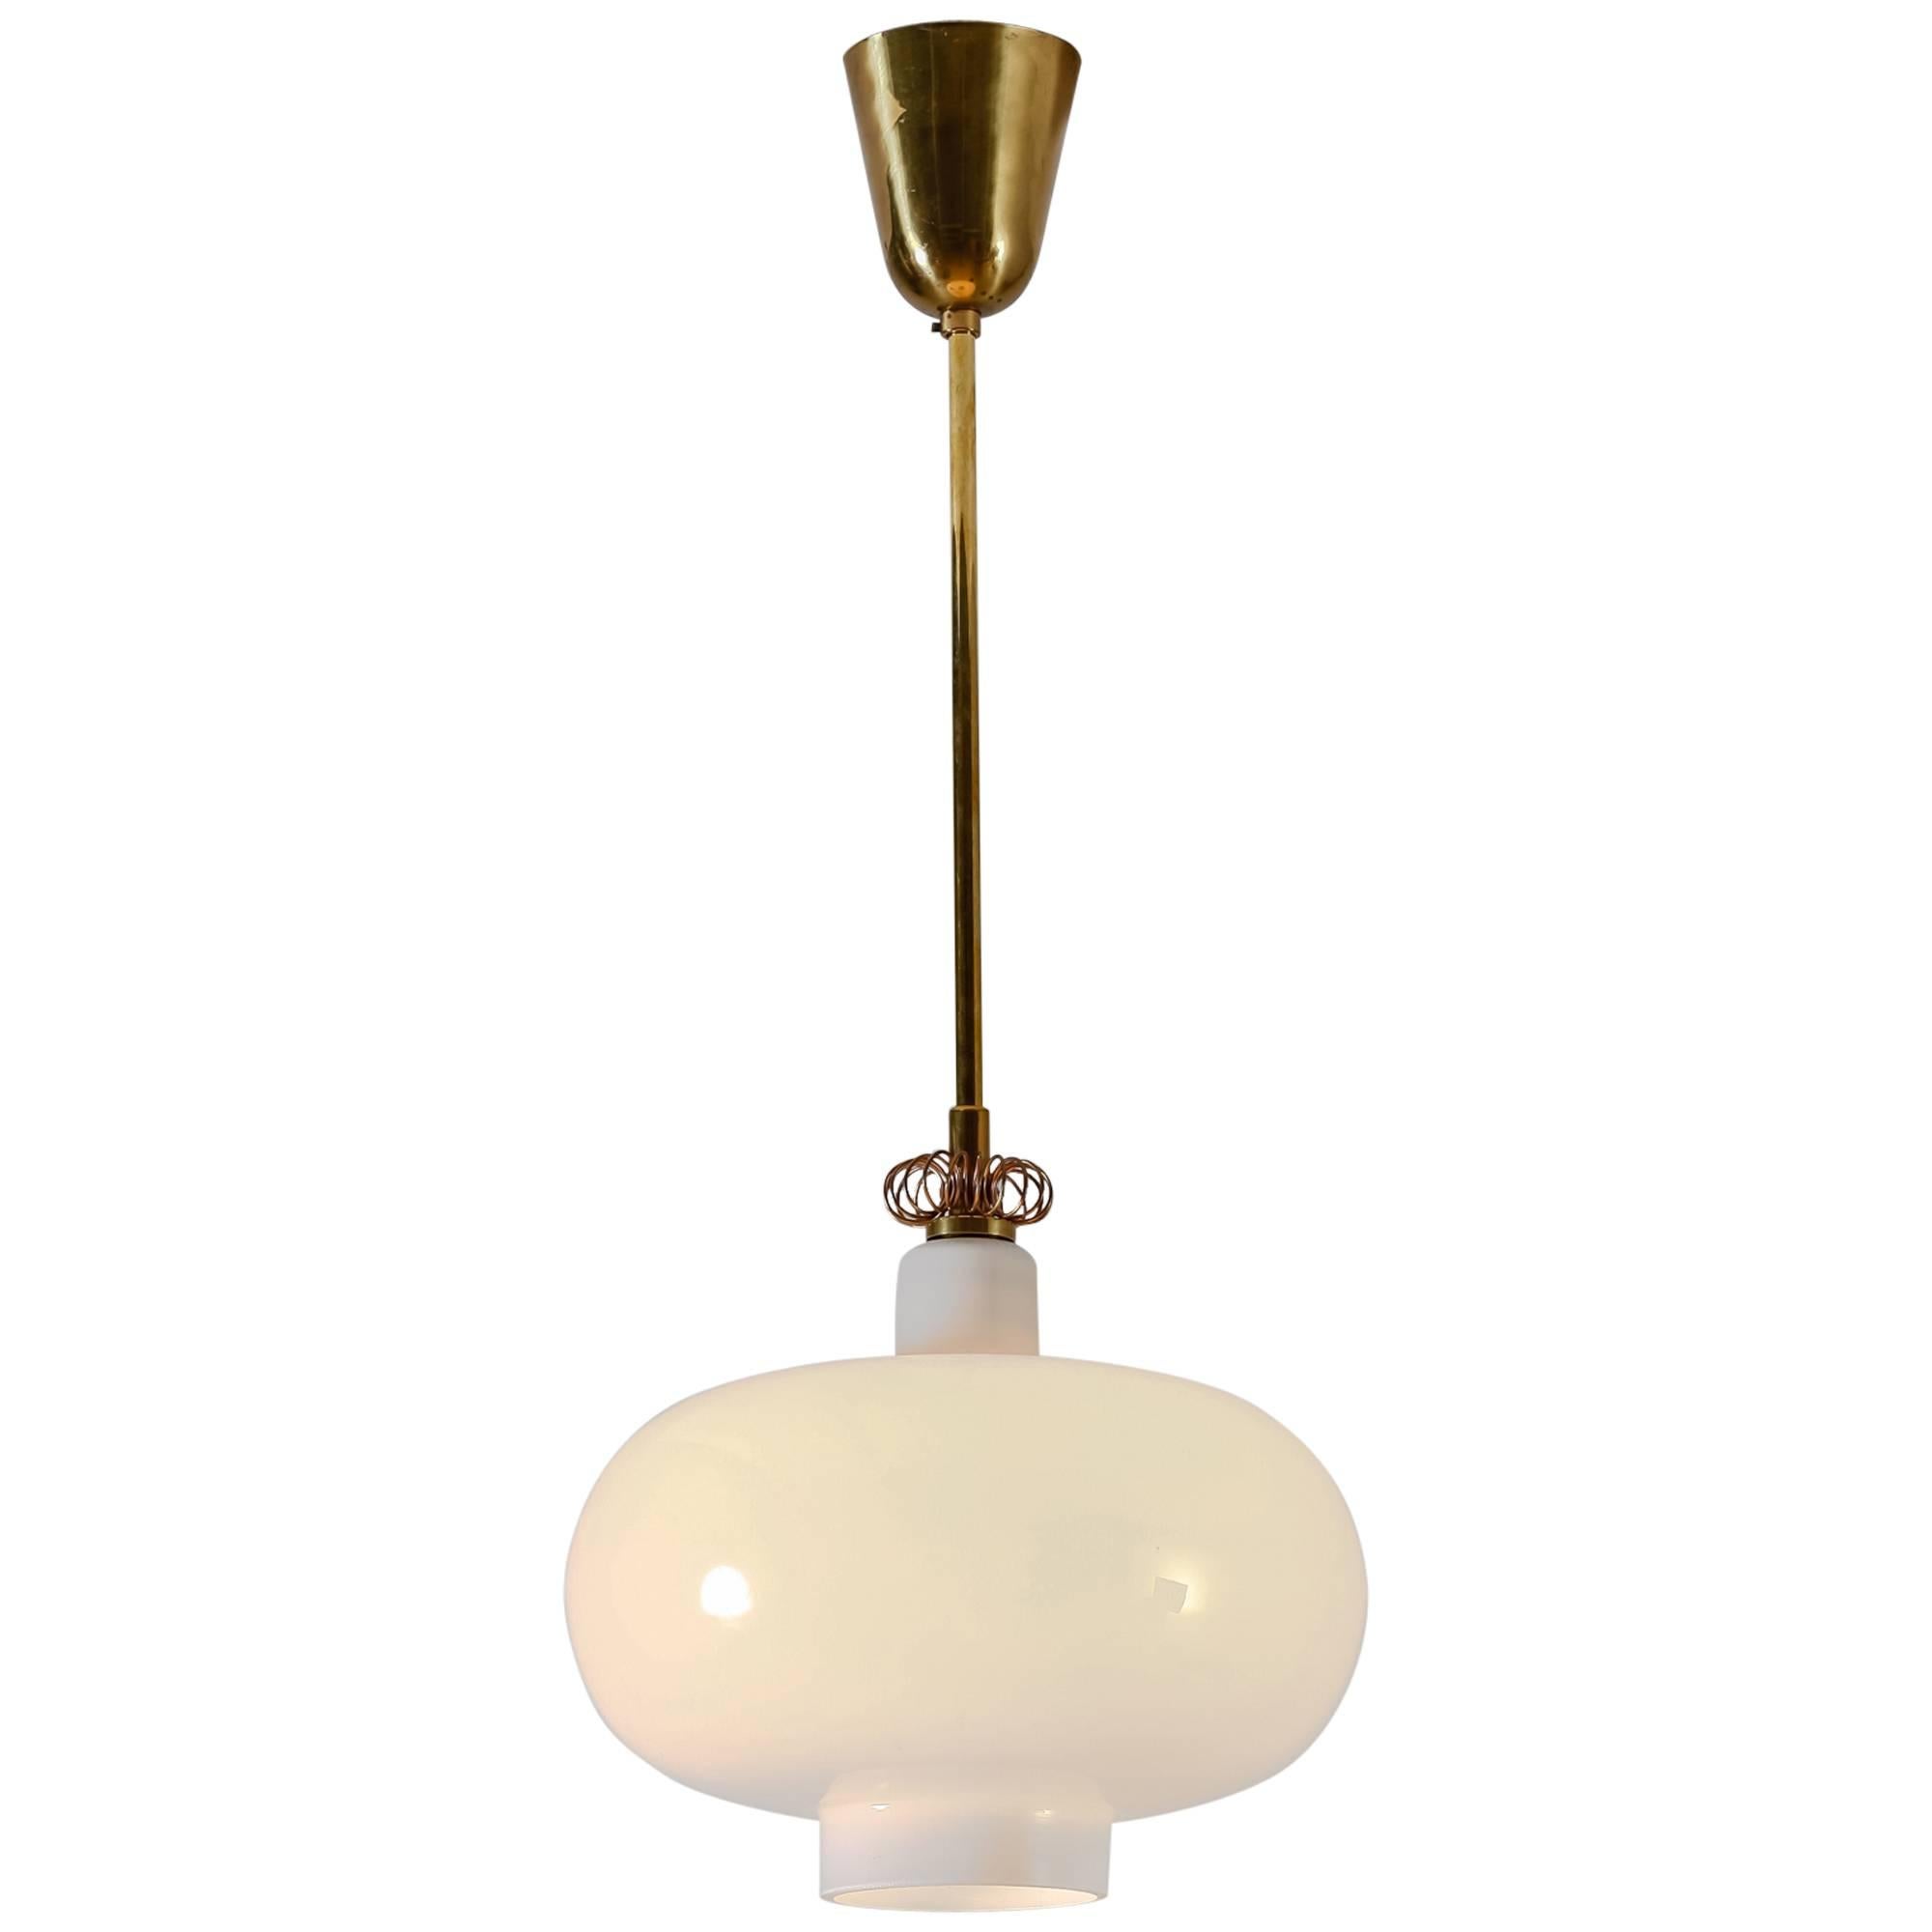 Paavo Tynell K2-19 opaline glass and brass pendant, Idman, Finland, 1950s For Sale